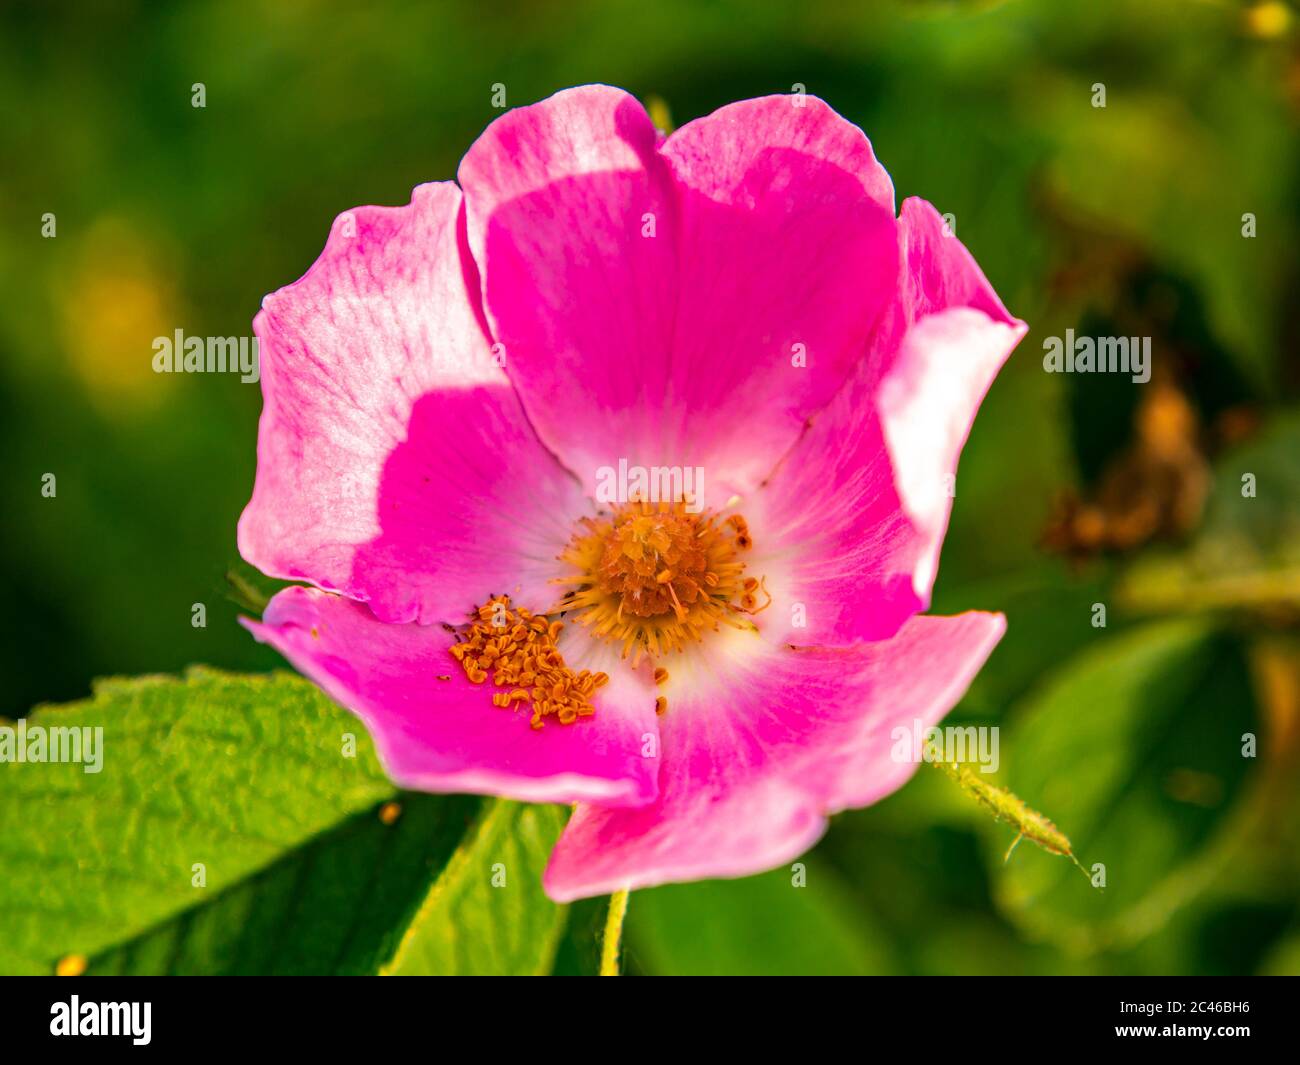 Blossom of a pink rosehip flower in the meadow. Stock Photo